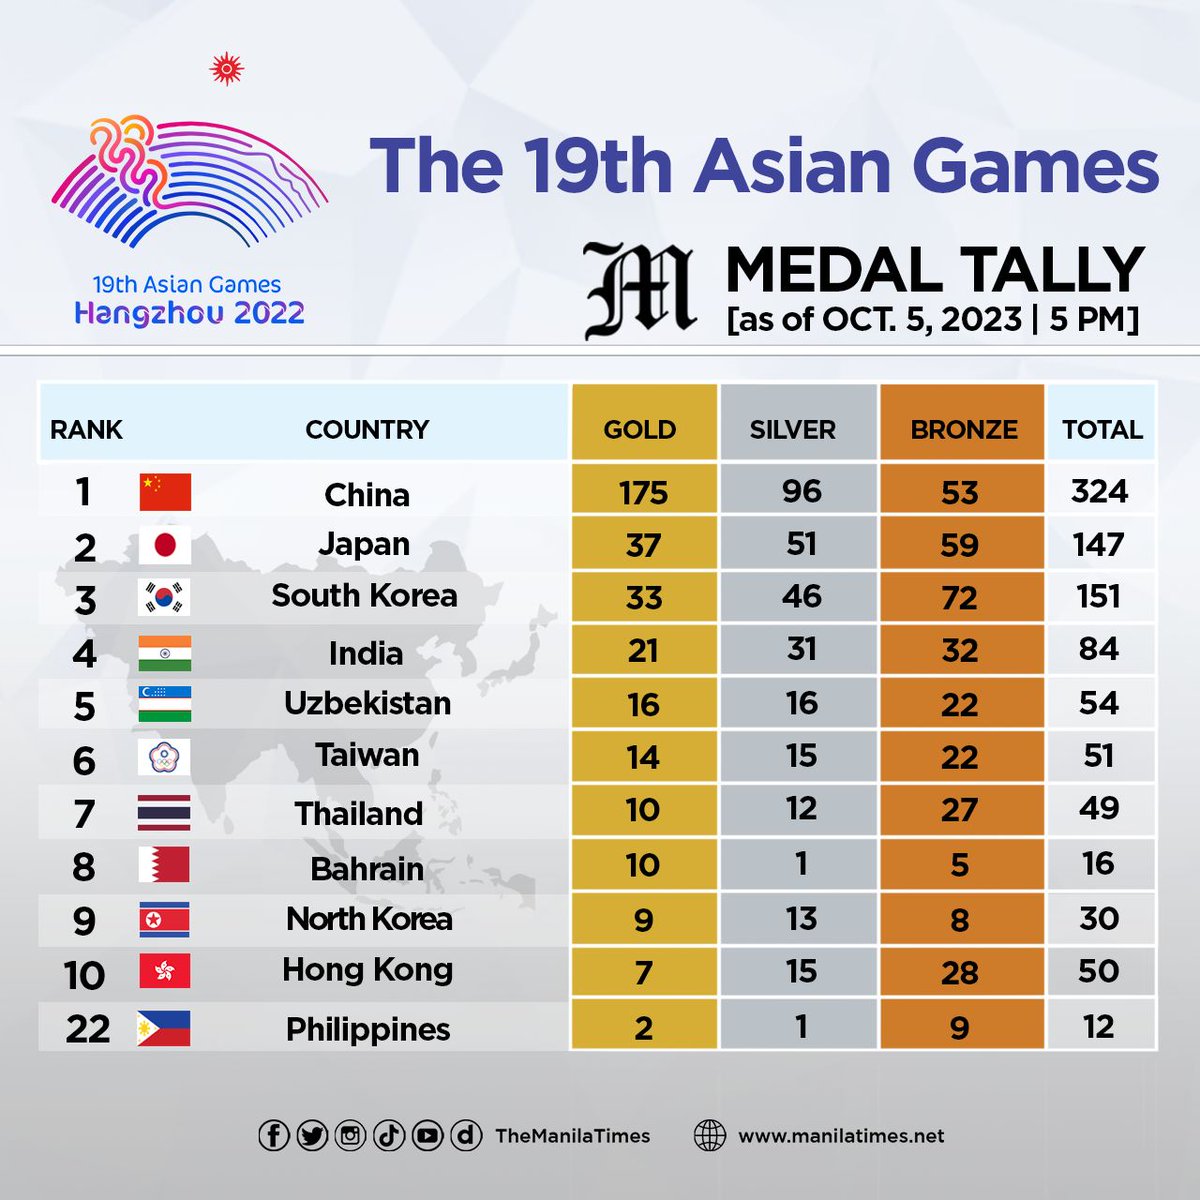 The 19th Asian Games Medal Tally as of 5 p.m., Oct. 5, 2023.